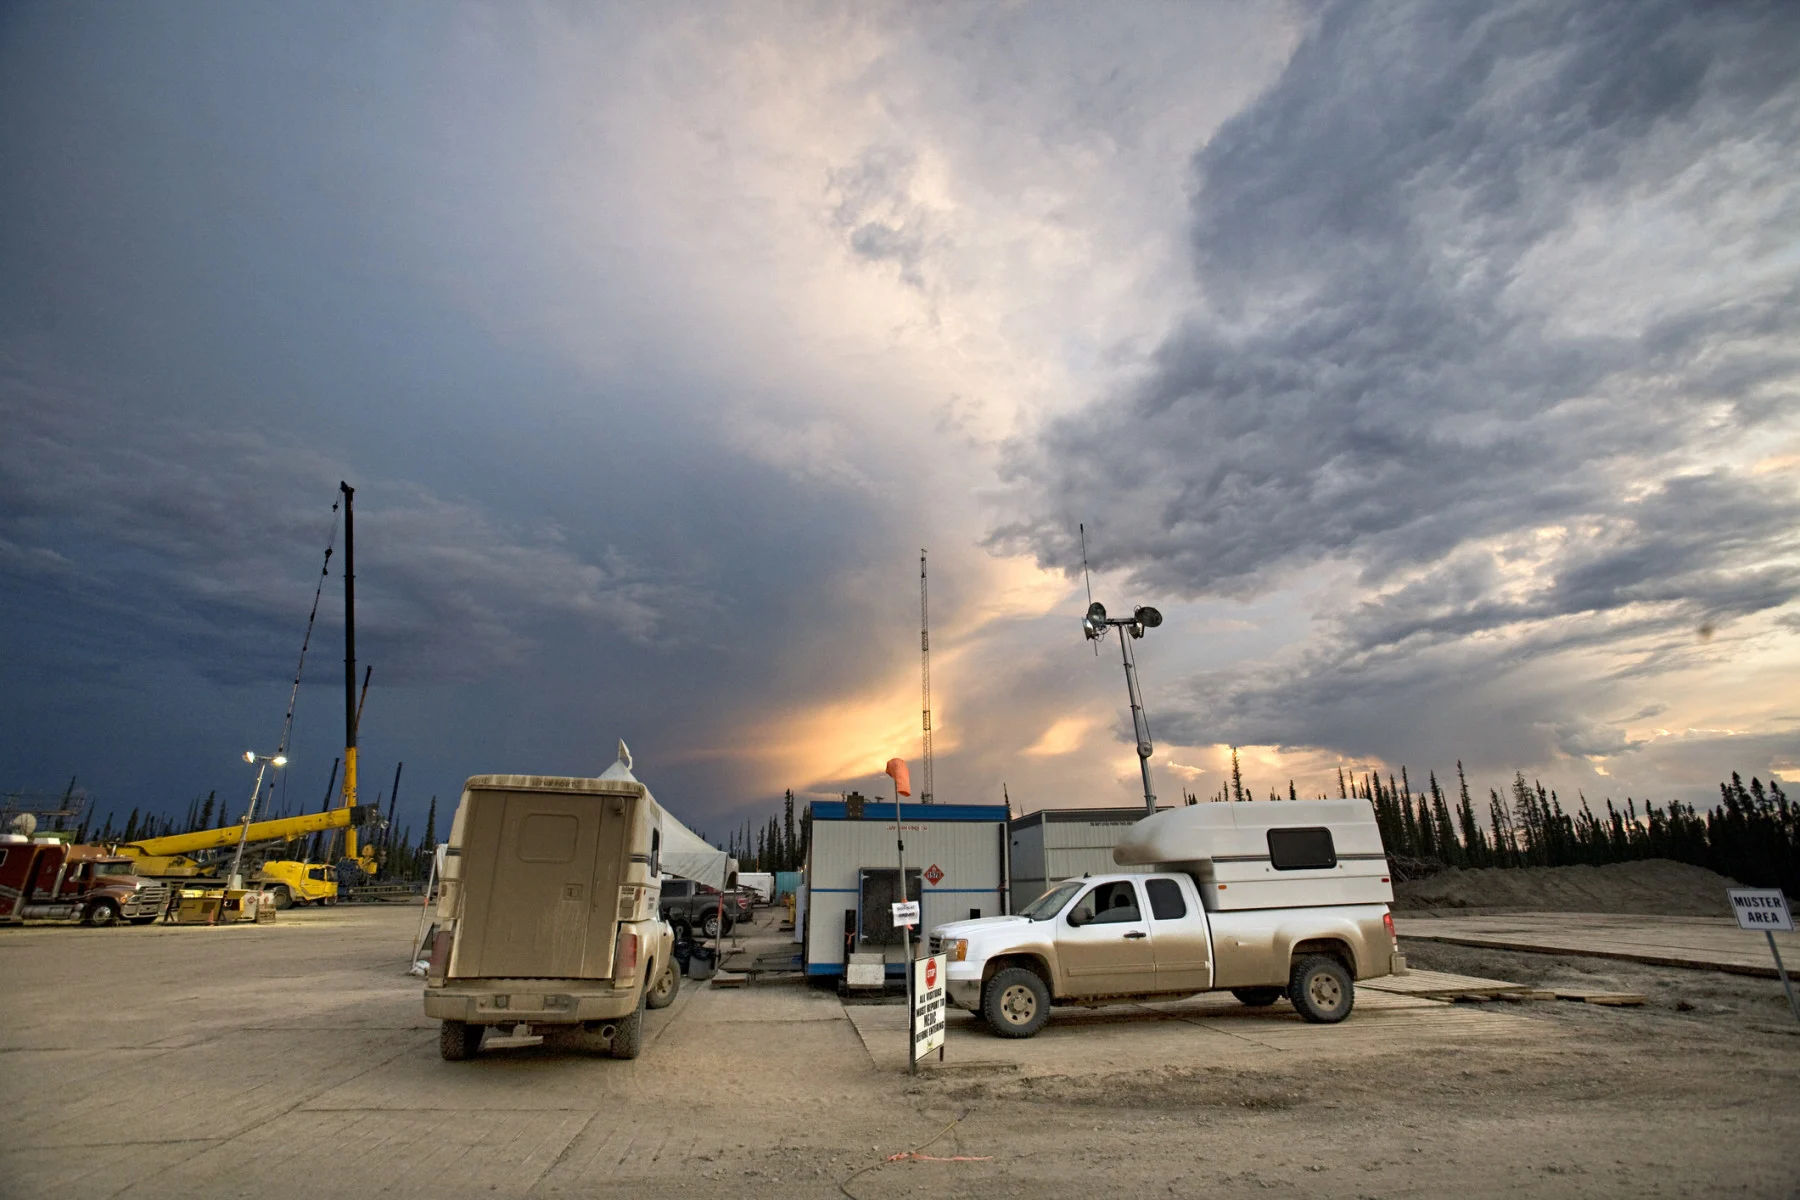 Medic trucks at entrance of fracking site, Northern British Columbia, Canada. (Aaron Black/ The Image Bank/ Getty Images)